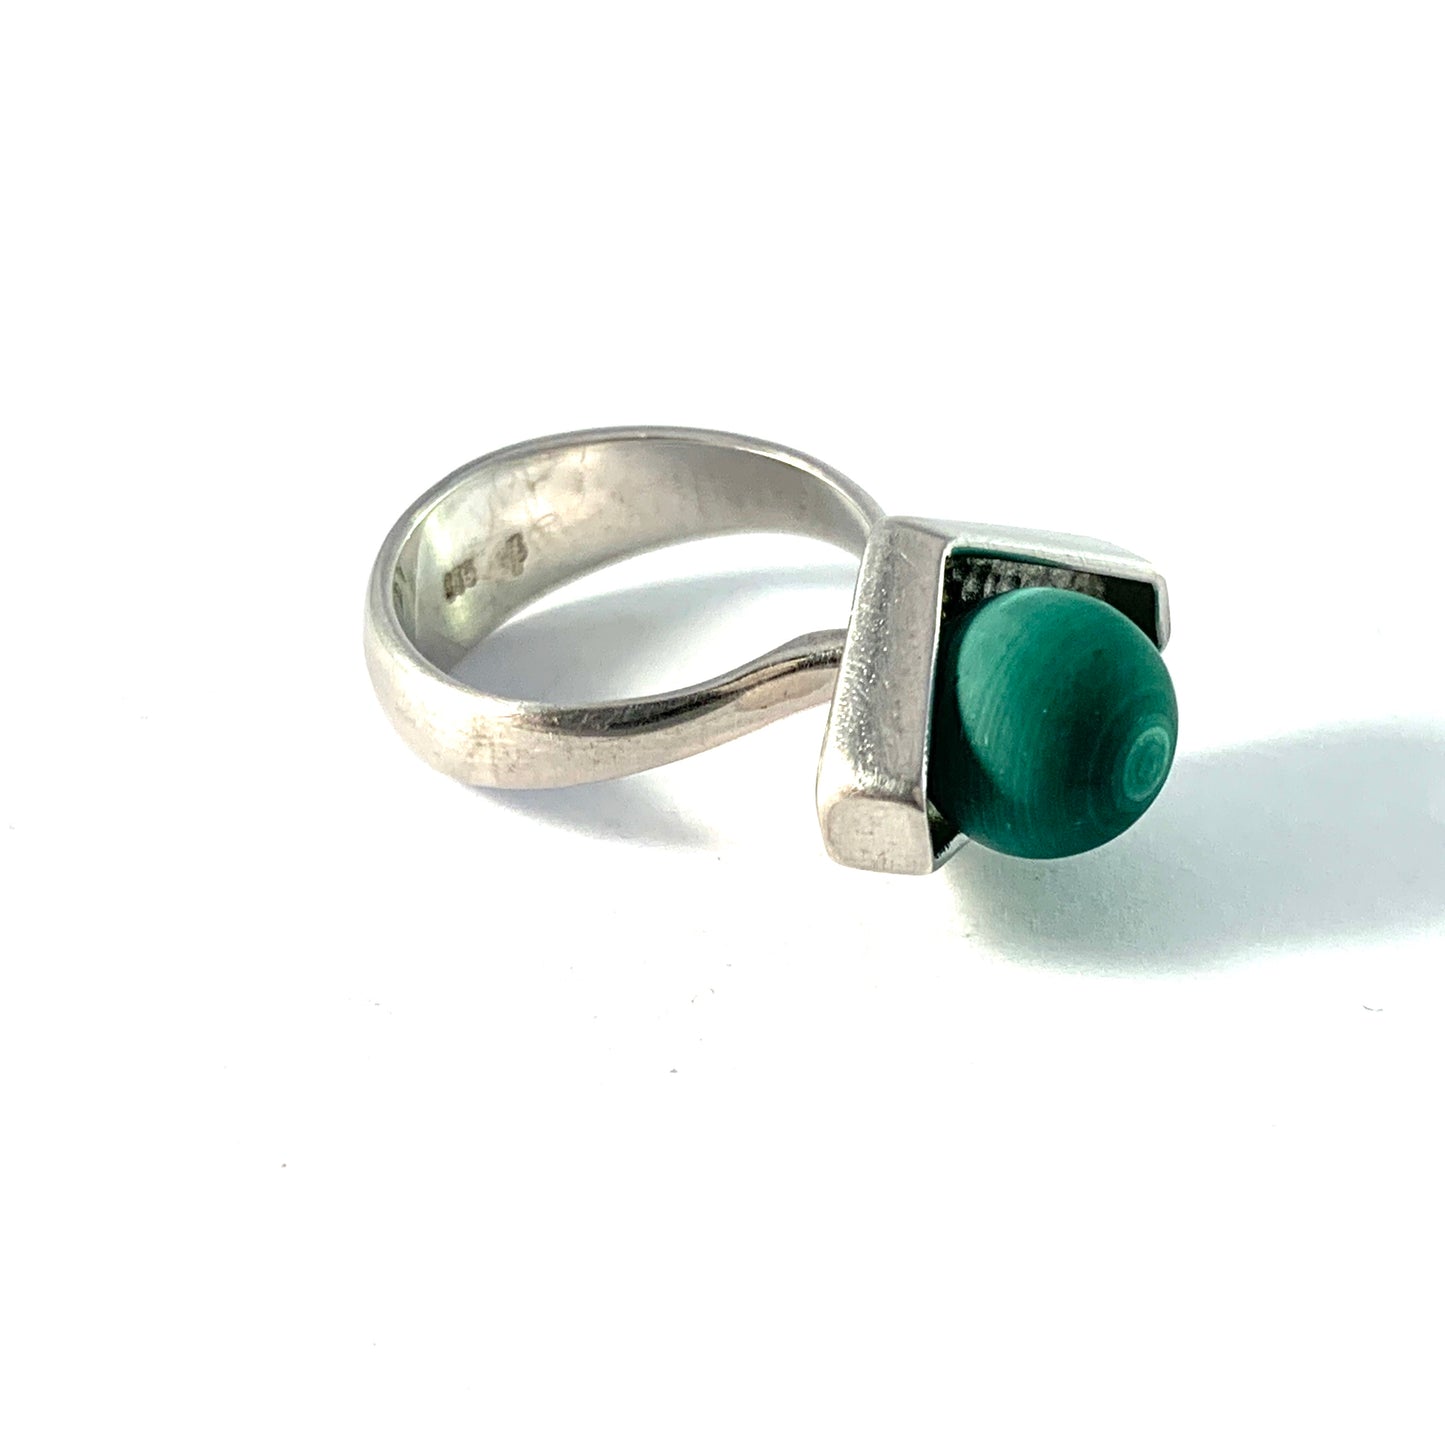 Germany / Austria 1960s. Solid Silver Malachite Modernist Ring. Makers' Mark.